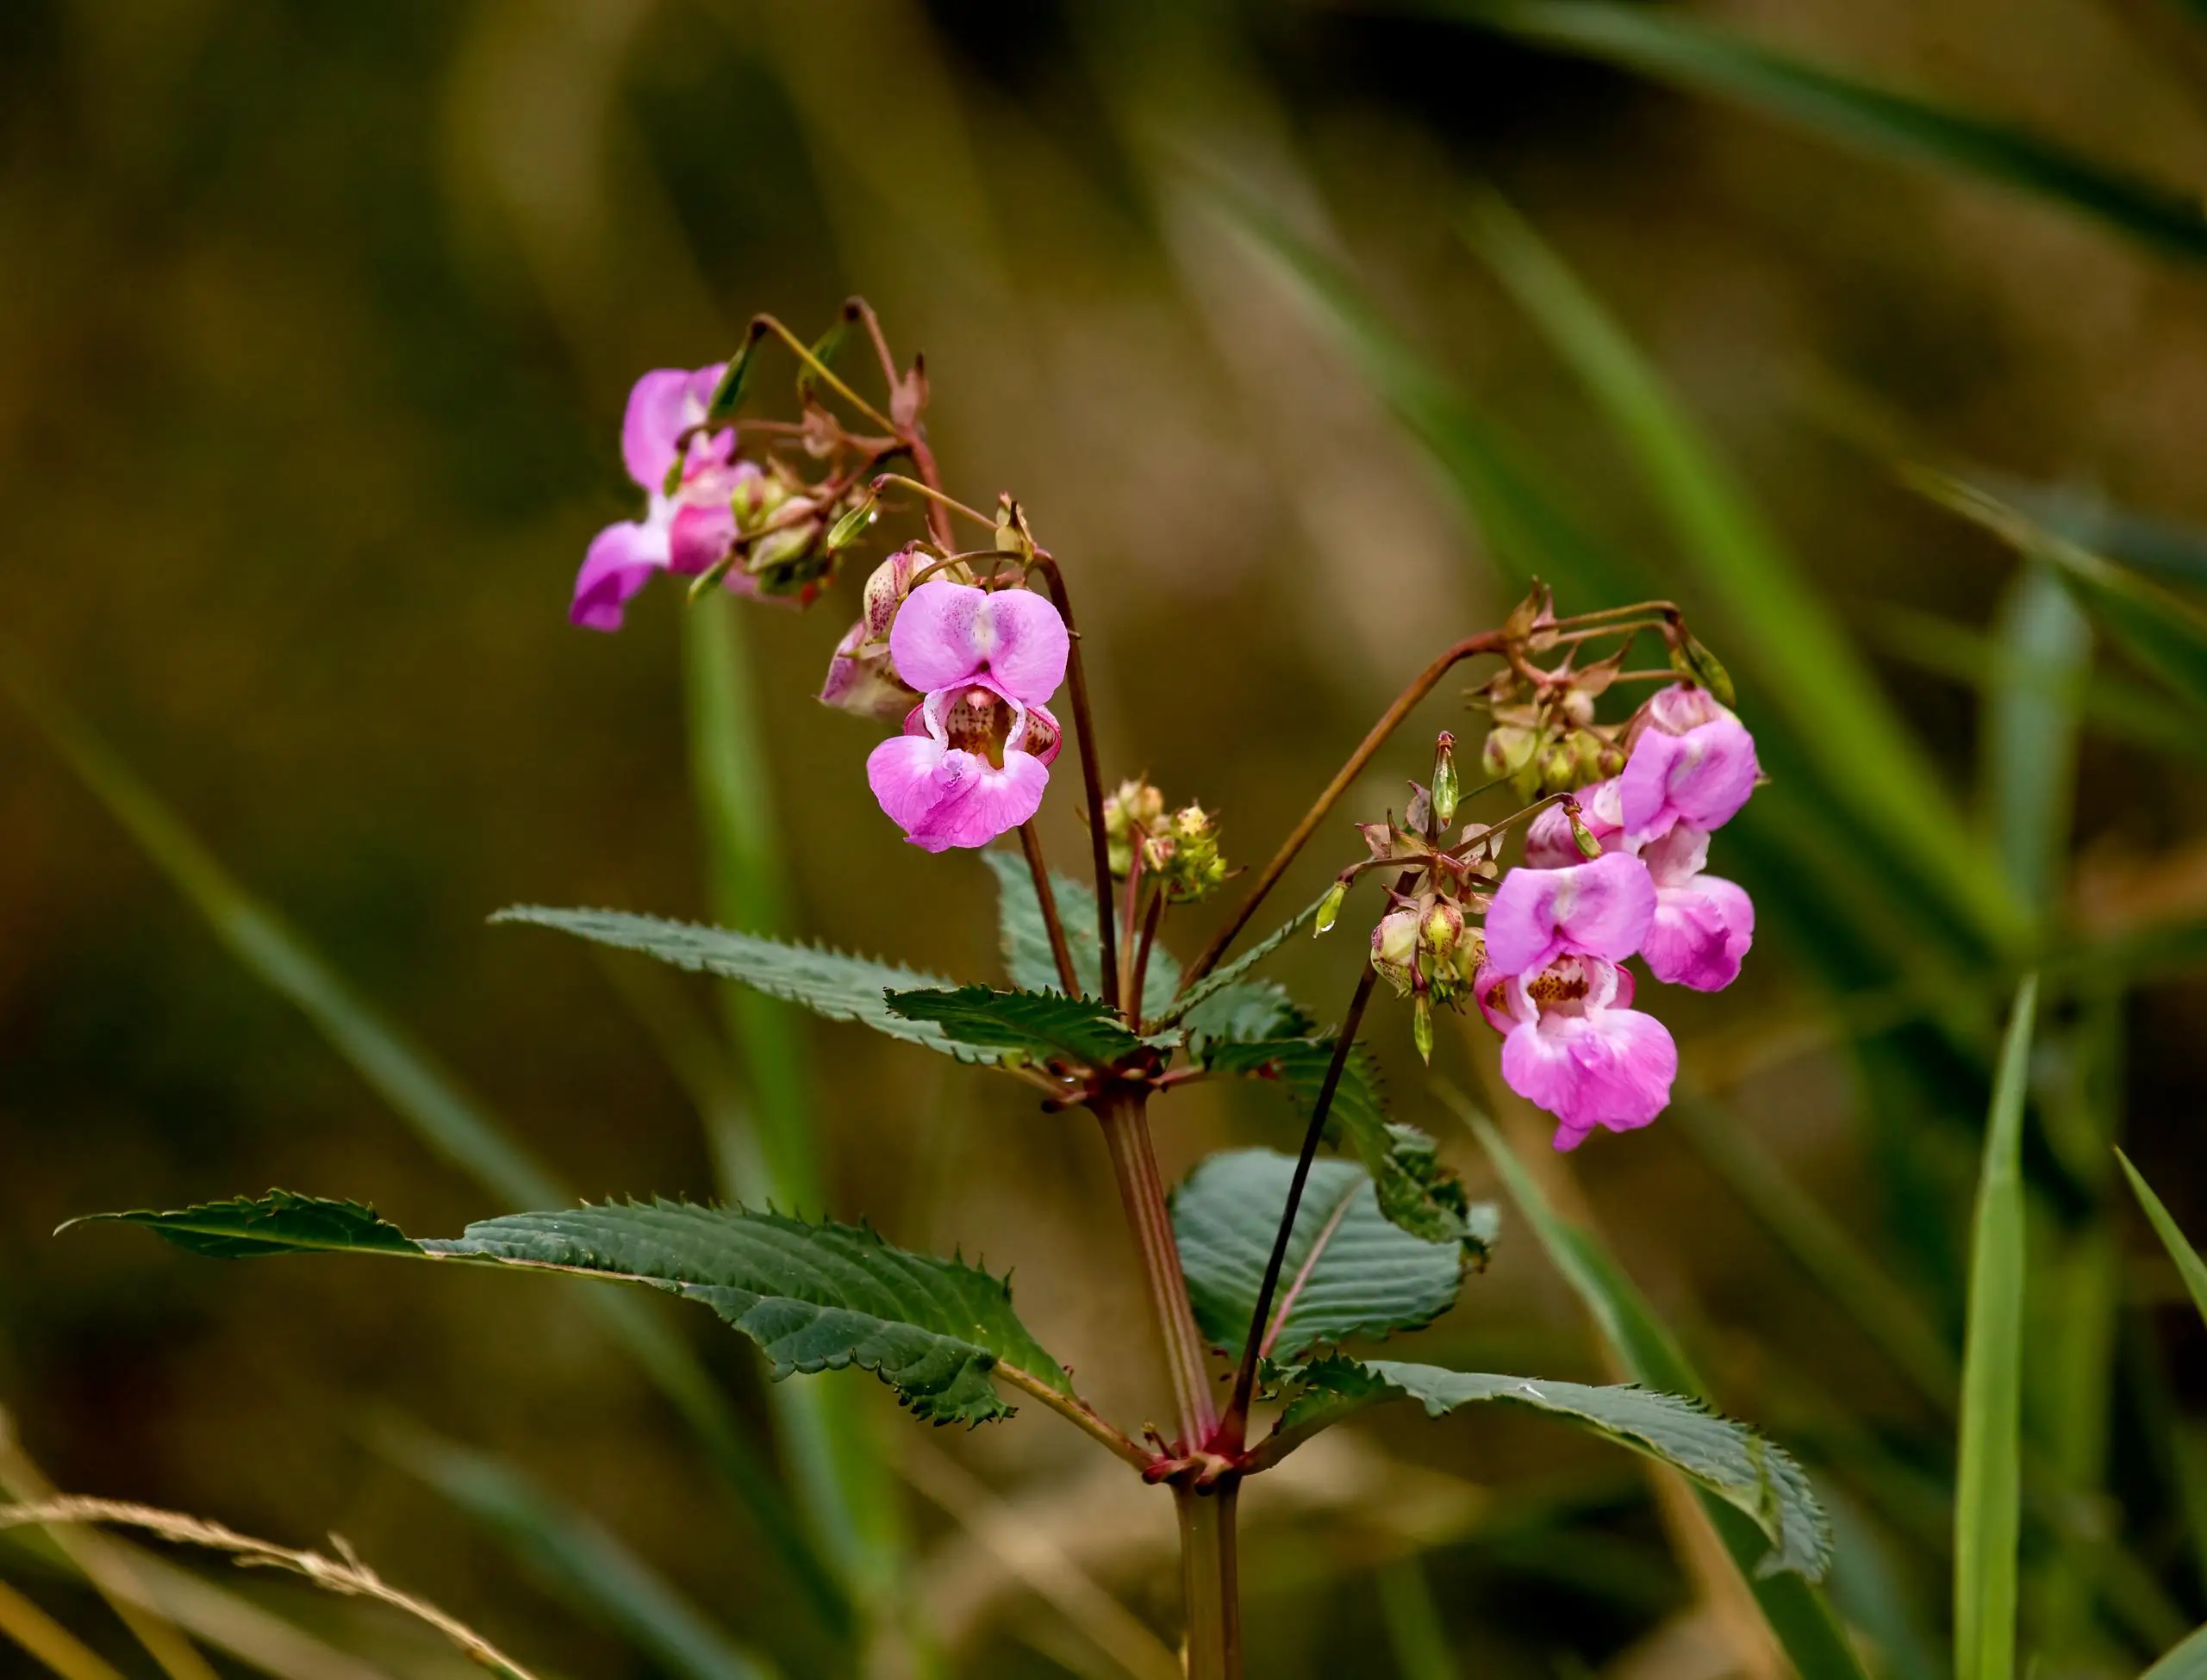 Himalayan Balsam, an invasive weed in the UK